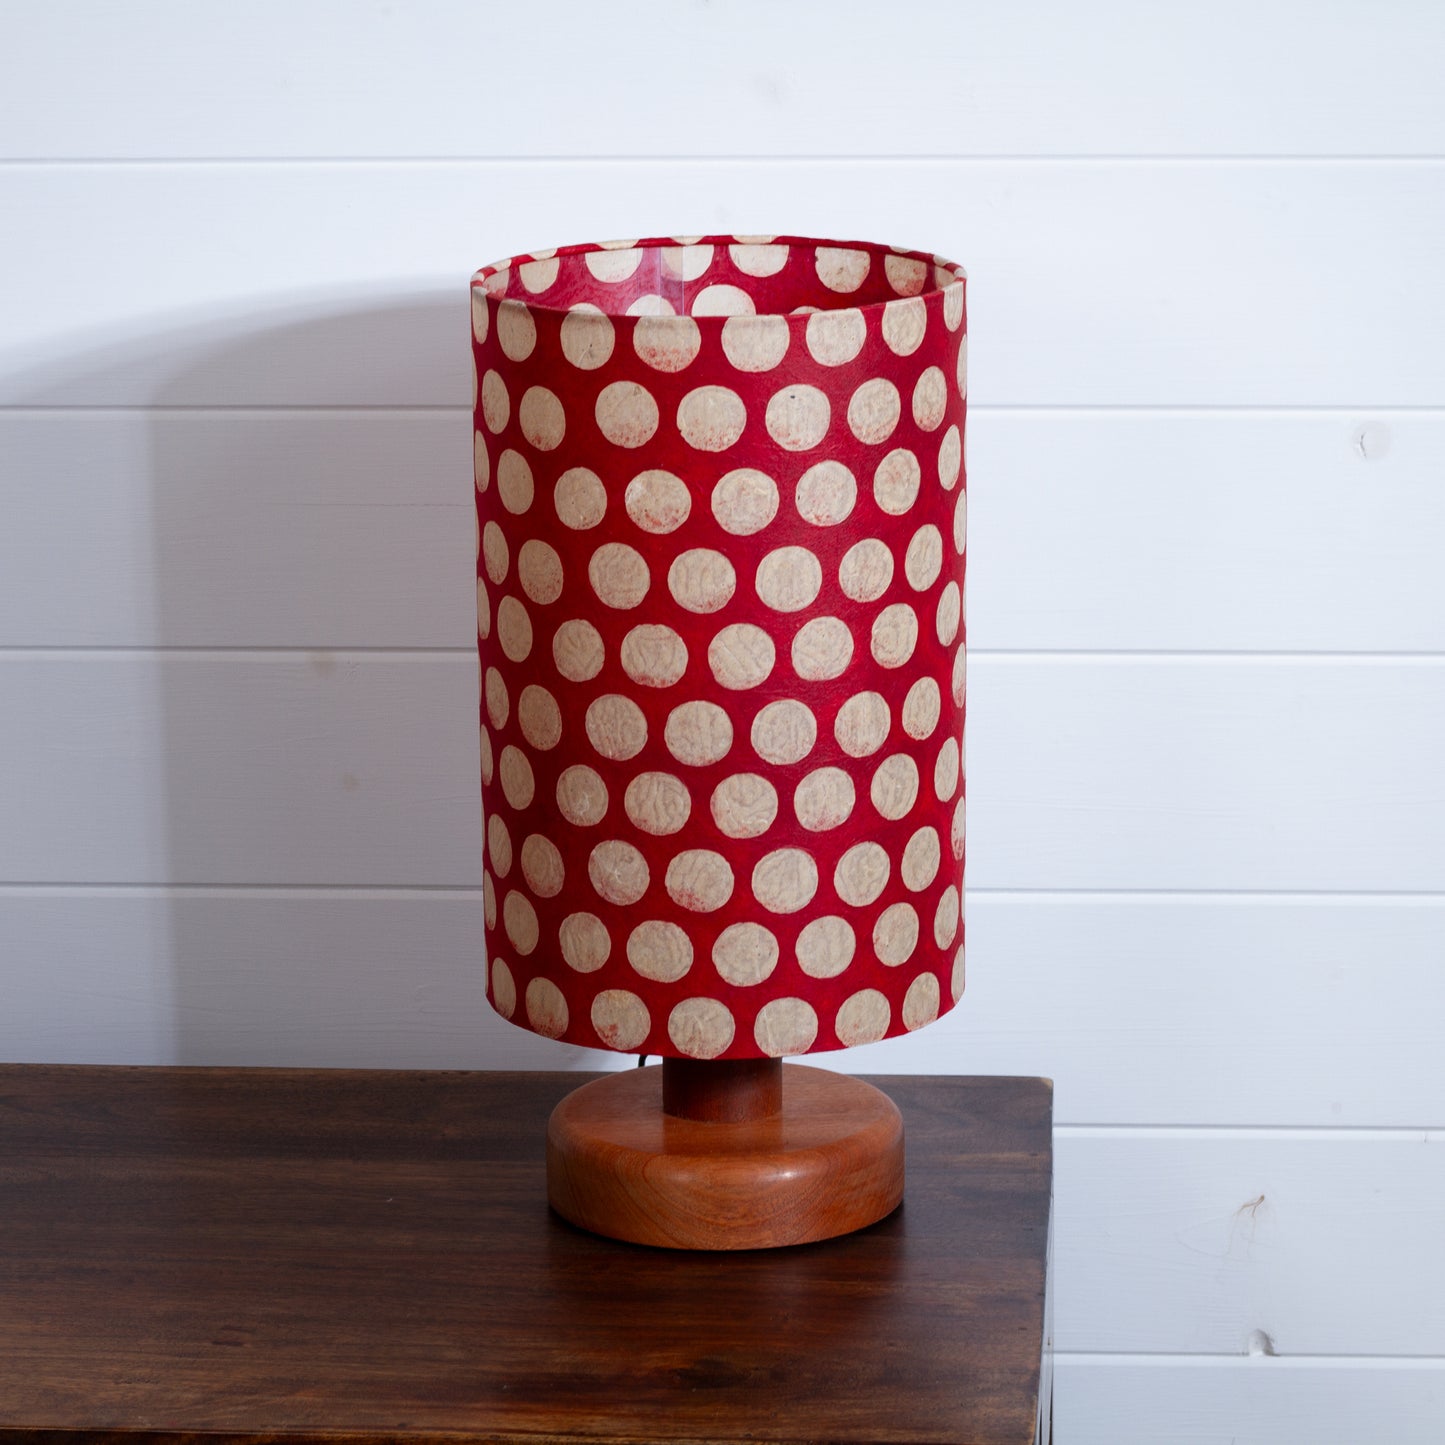 Round Sapele Table Lamp (15cm) with 20cm x 30cm Drum Lampshade in P84 ~ Batik Dots on Red